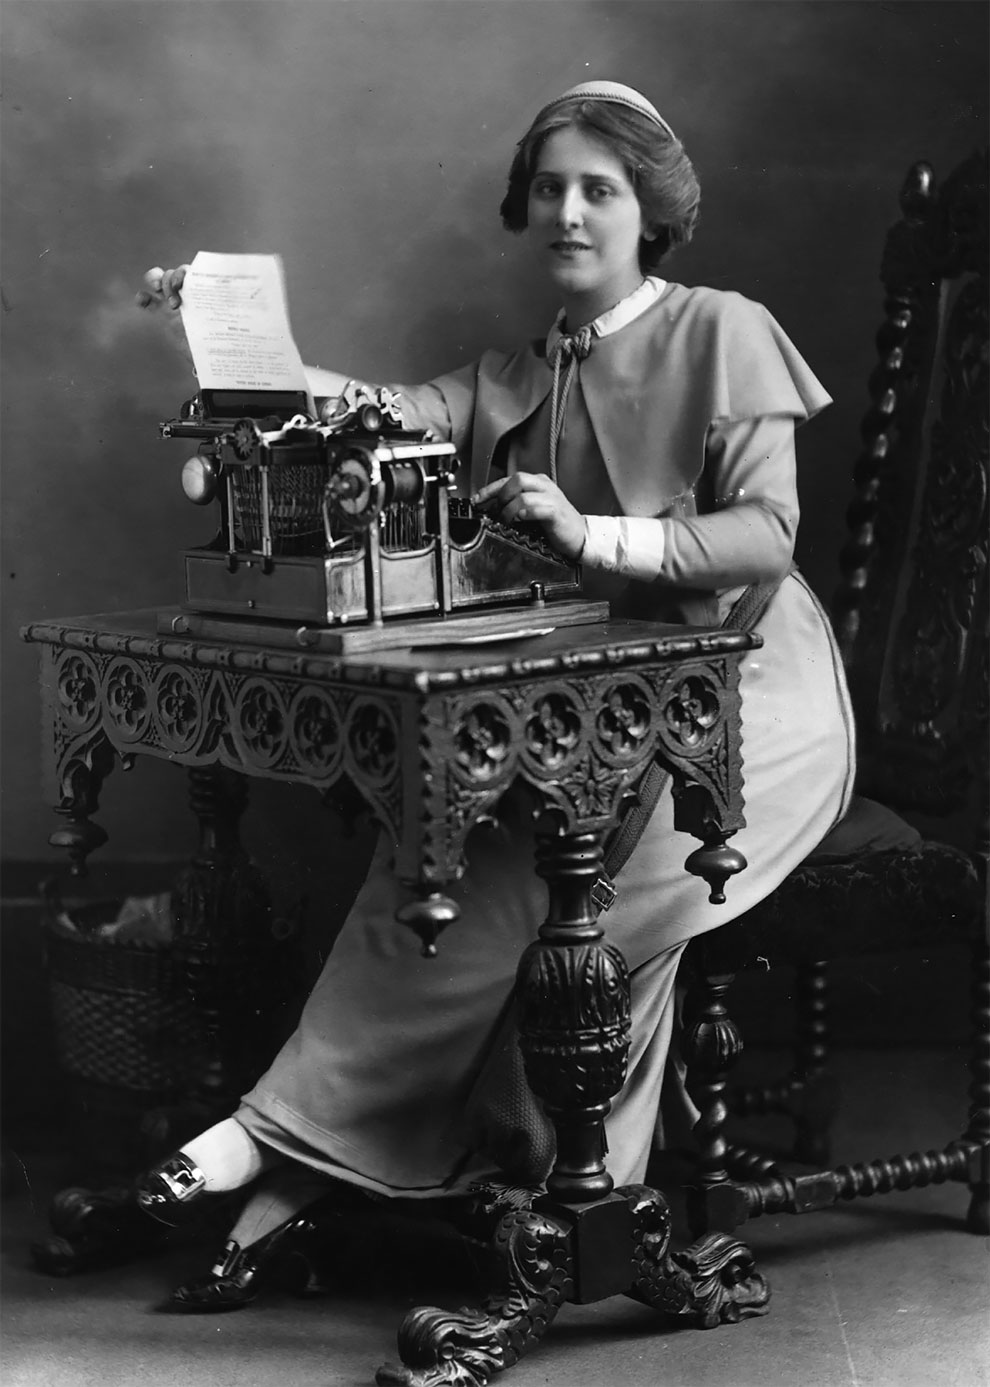 Woman Working At Typewriter by George Marks